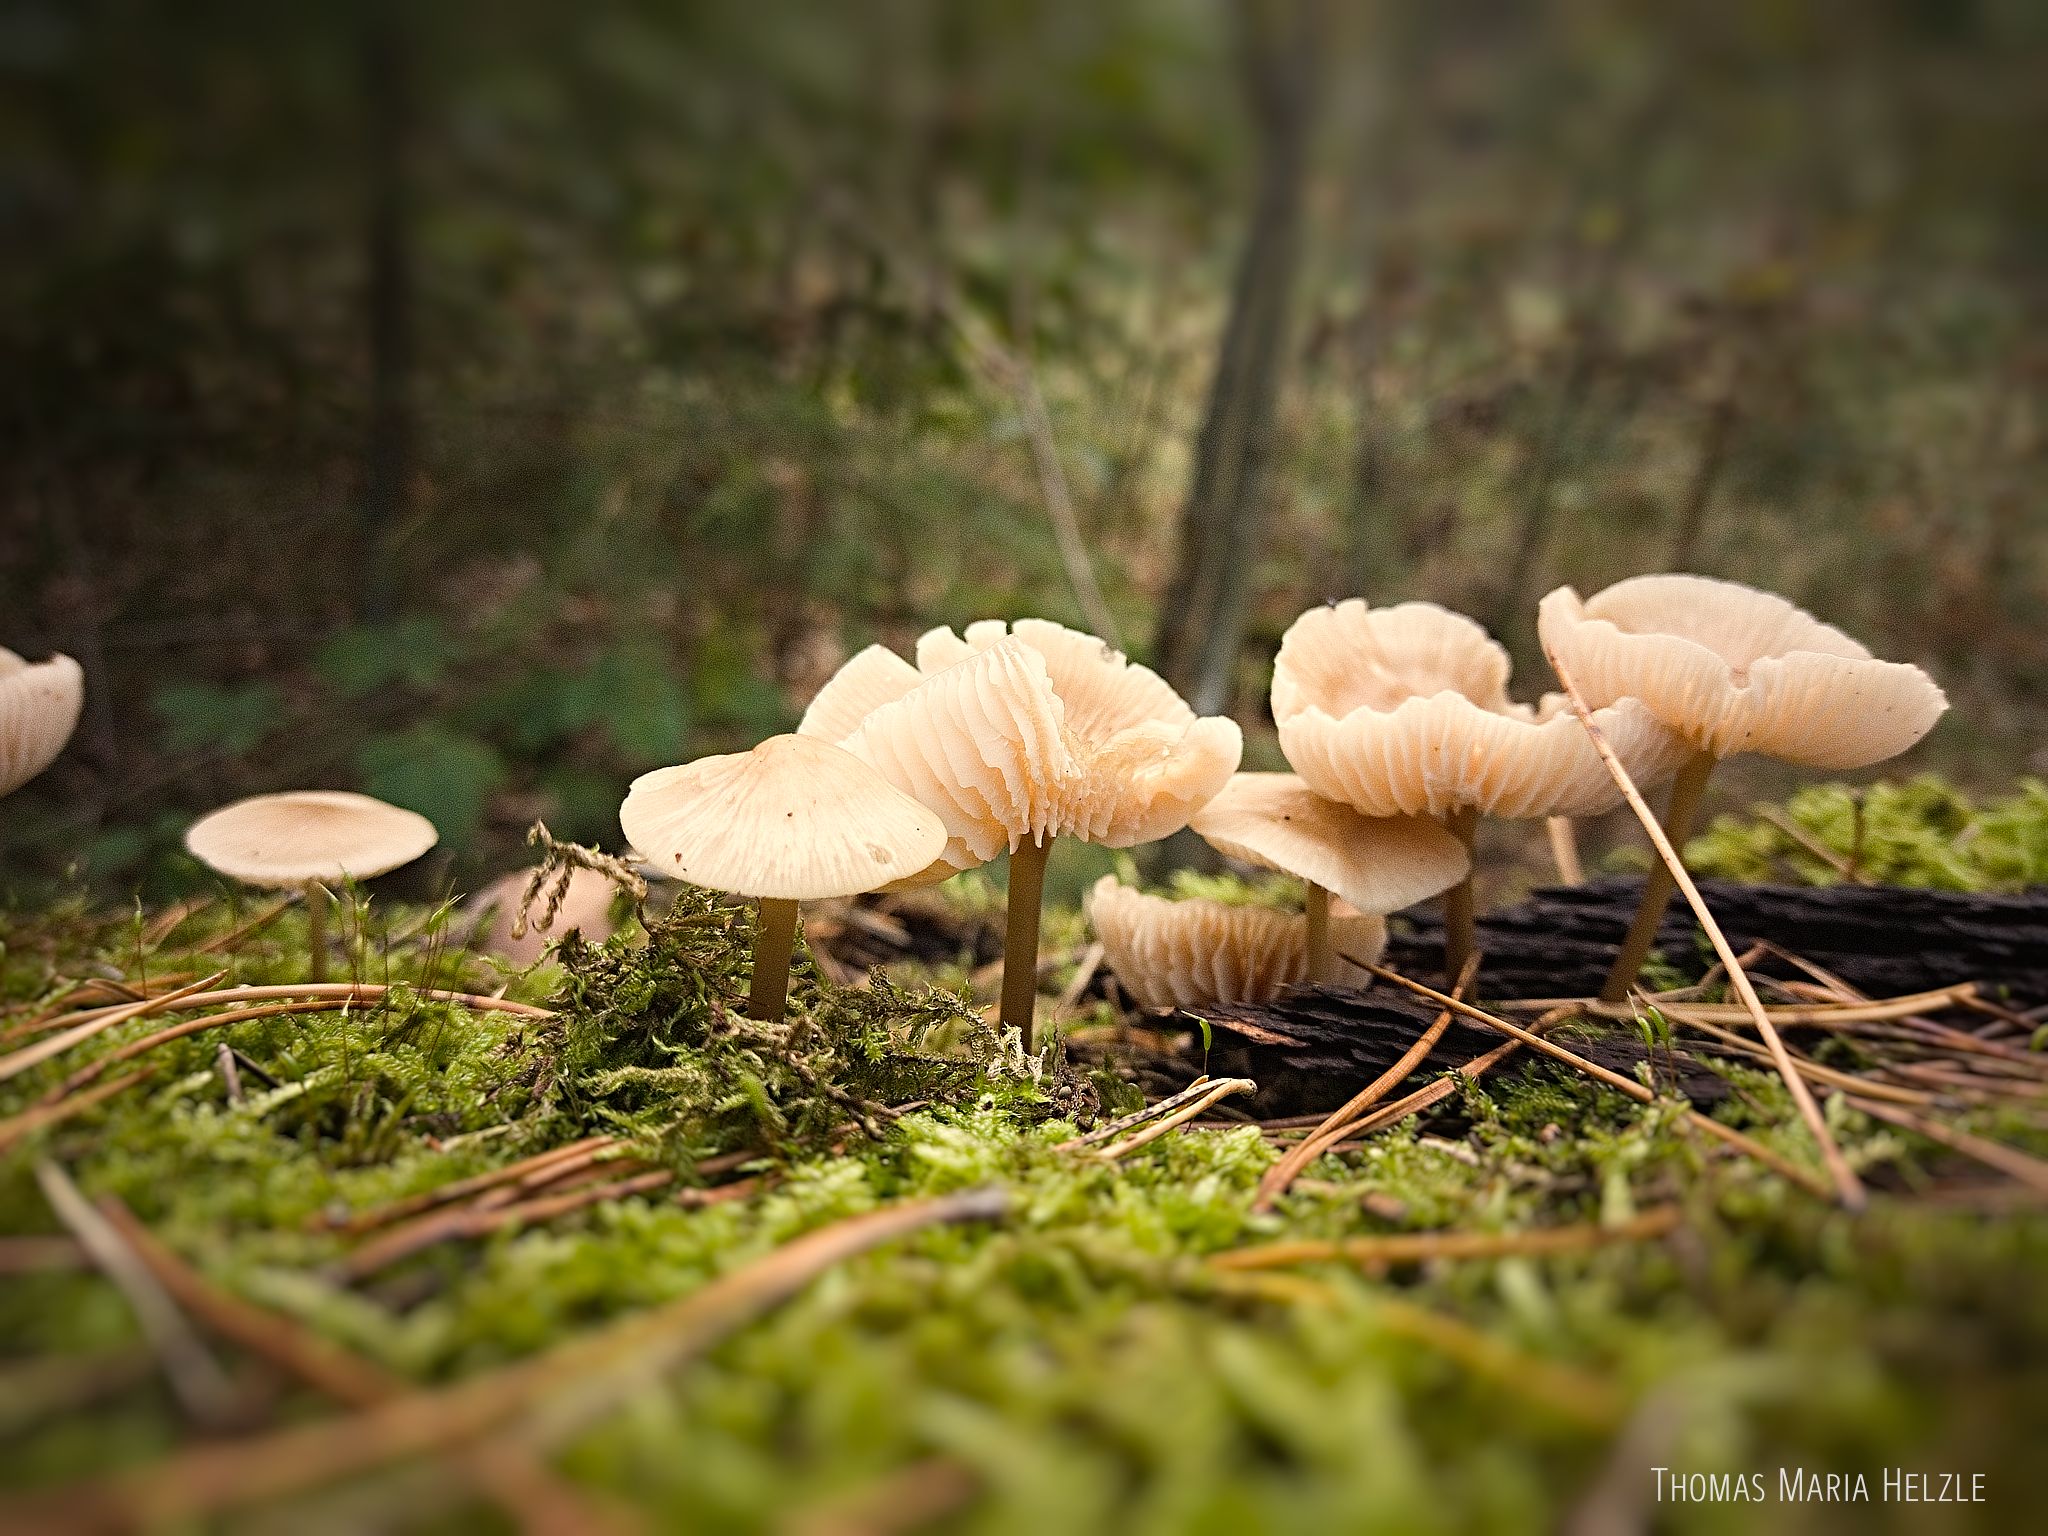 Small light-beige mushrooms grow from a fallen tree that is completely overgrown by moss in this macro shot. They show their gills and there are pine needles lying on the moss.